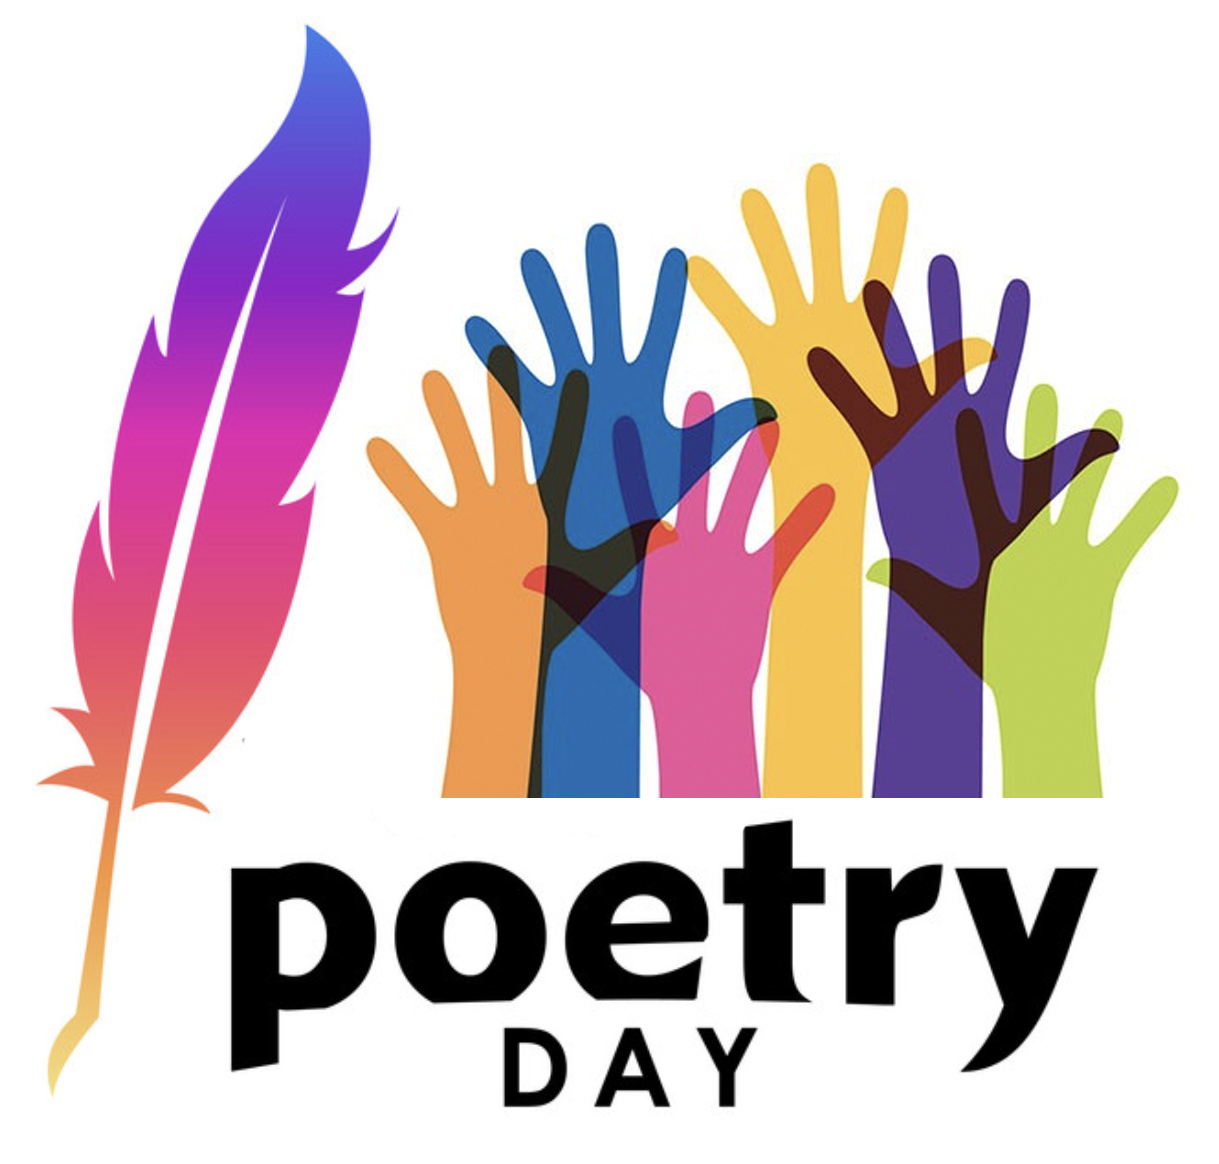 Grade 7 and 8 Poetry Day